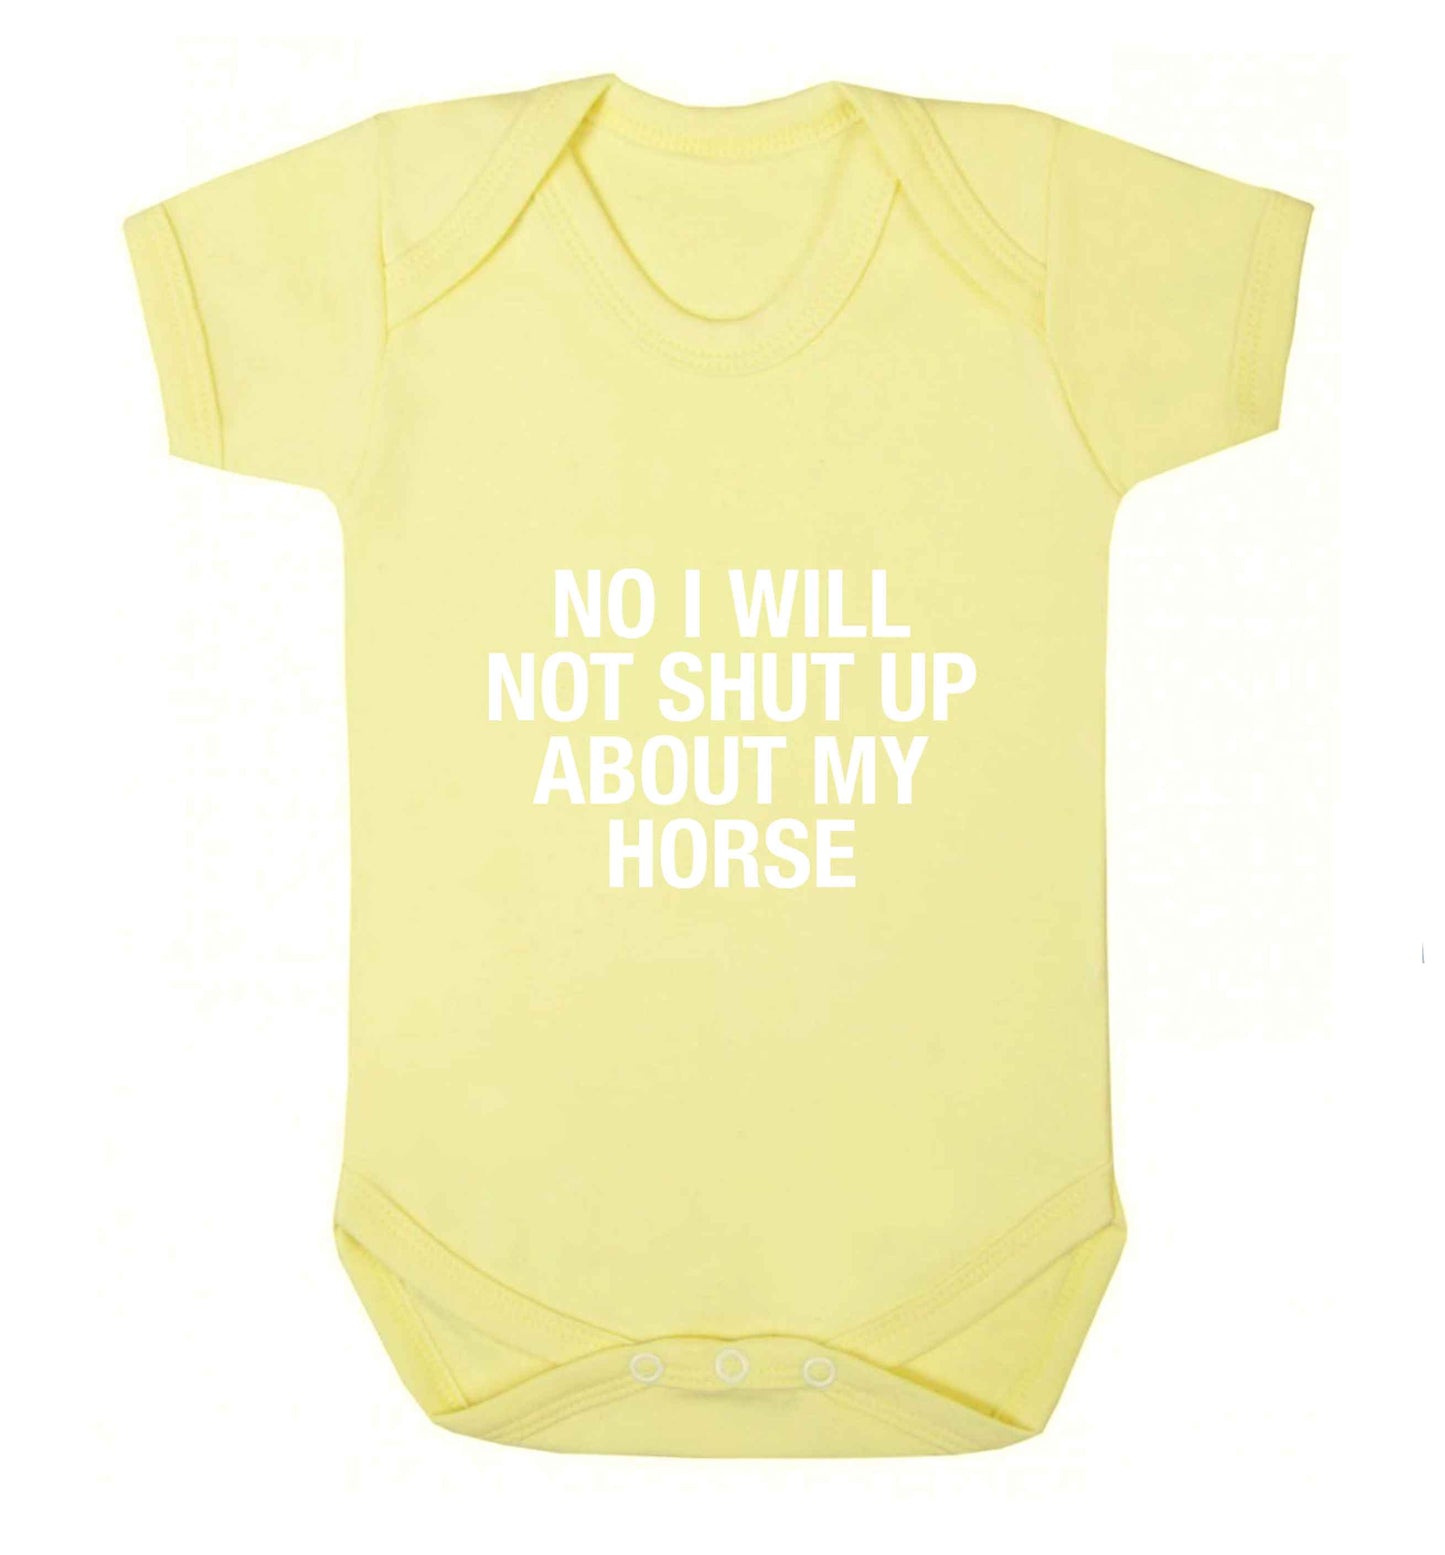 No I will not shut up talking about my horse baby vest pale yellow 18-24 months